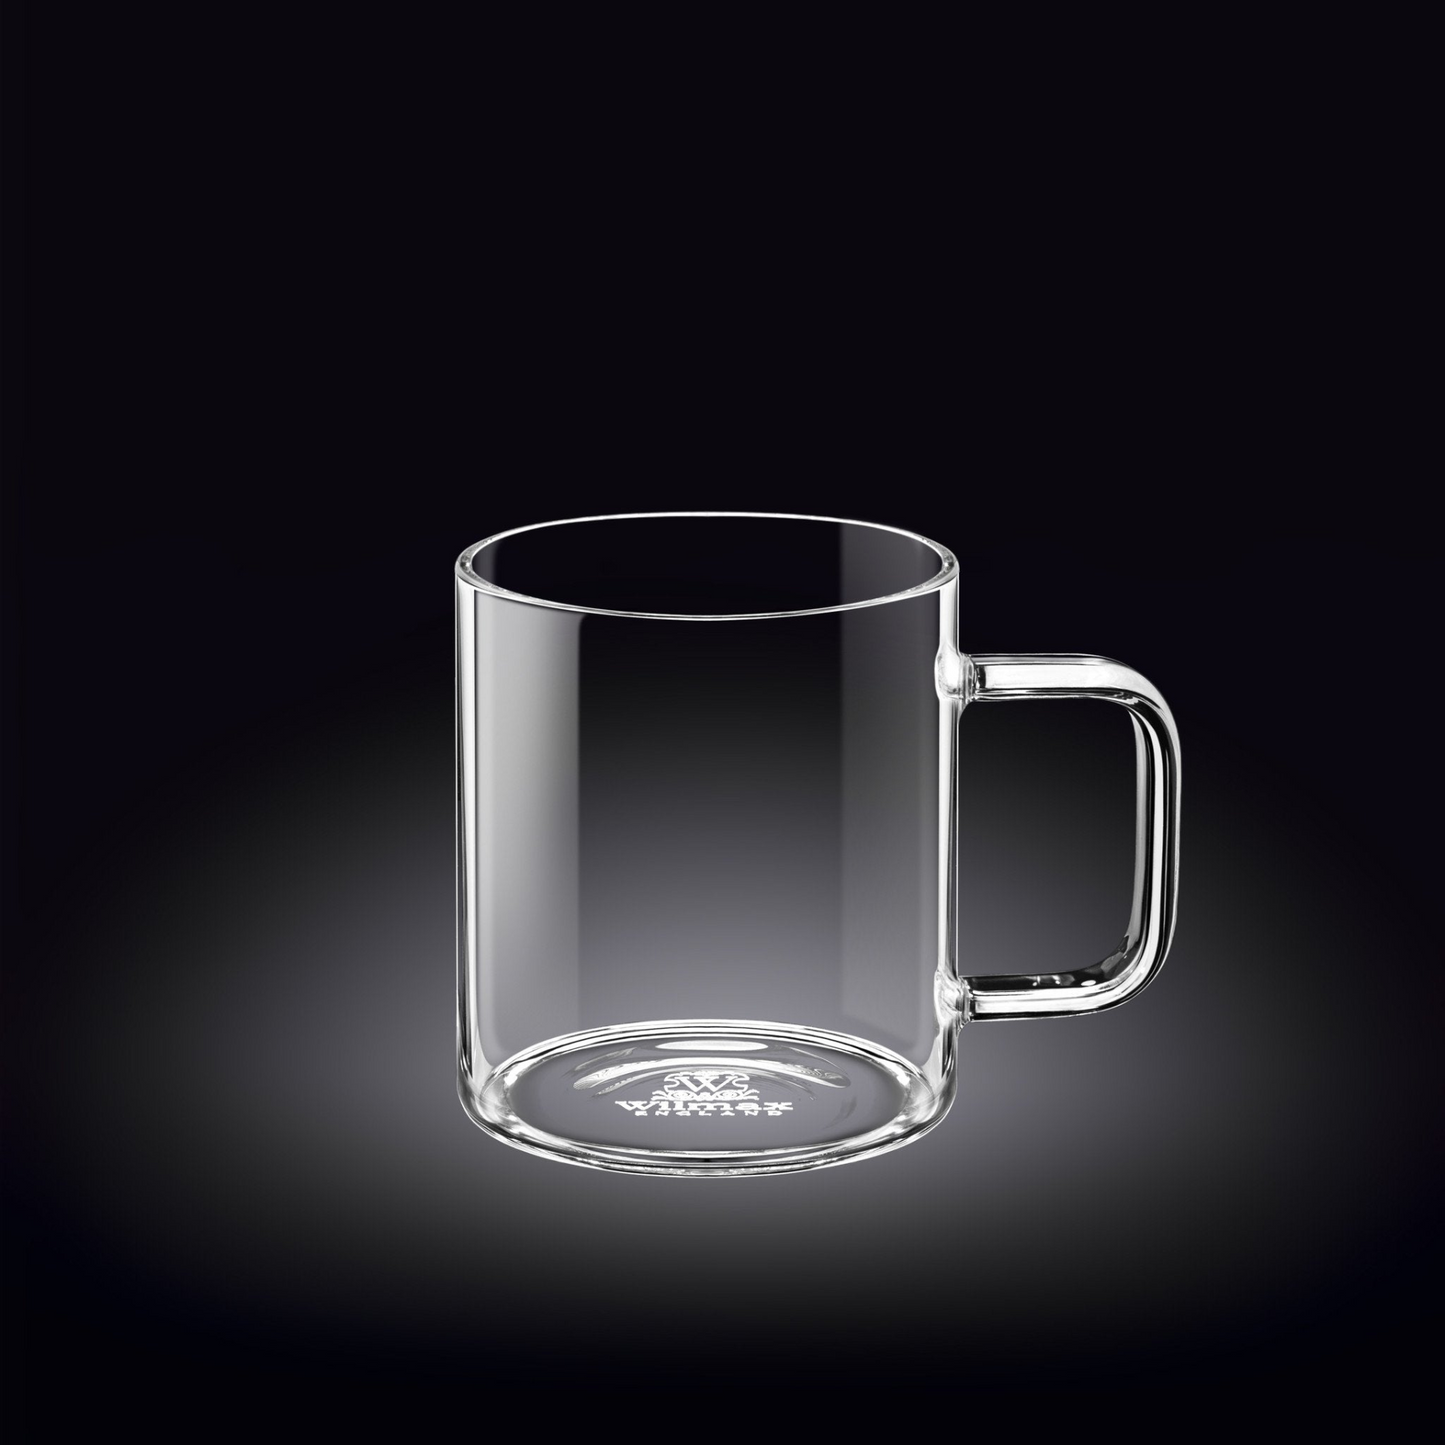 Wilmax Thermo Glass Mug 11 Oz | High temperature and shock resistant  WL-888606/A